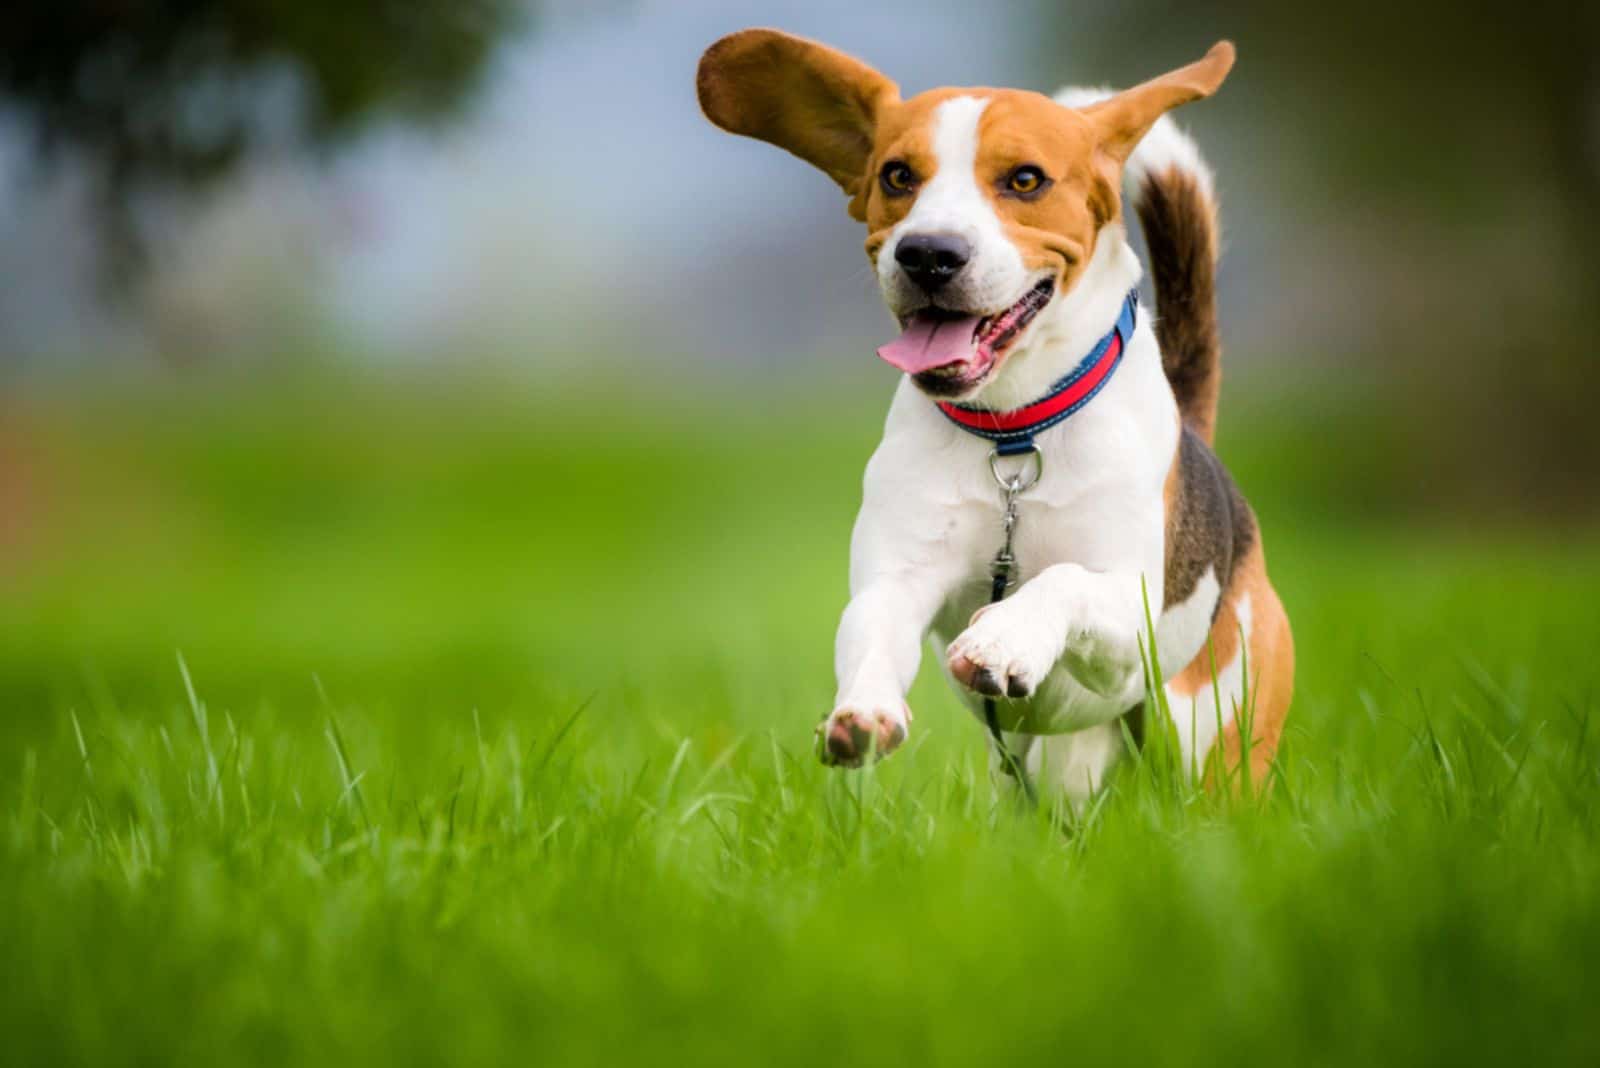 beagle running fast outdoor on the grass